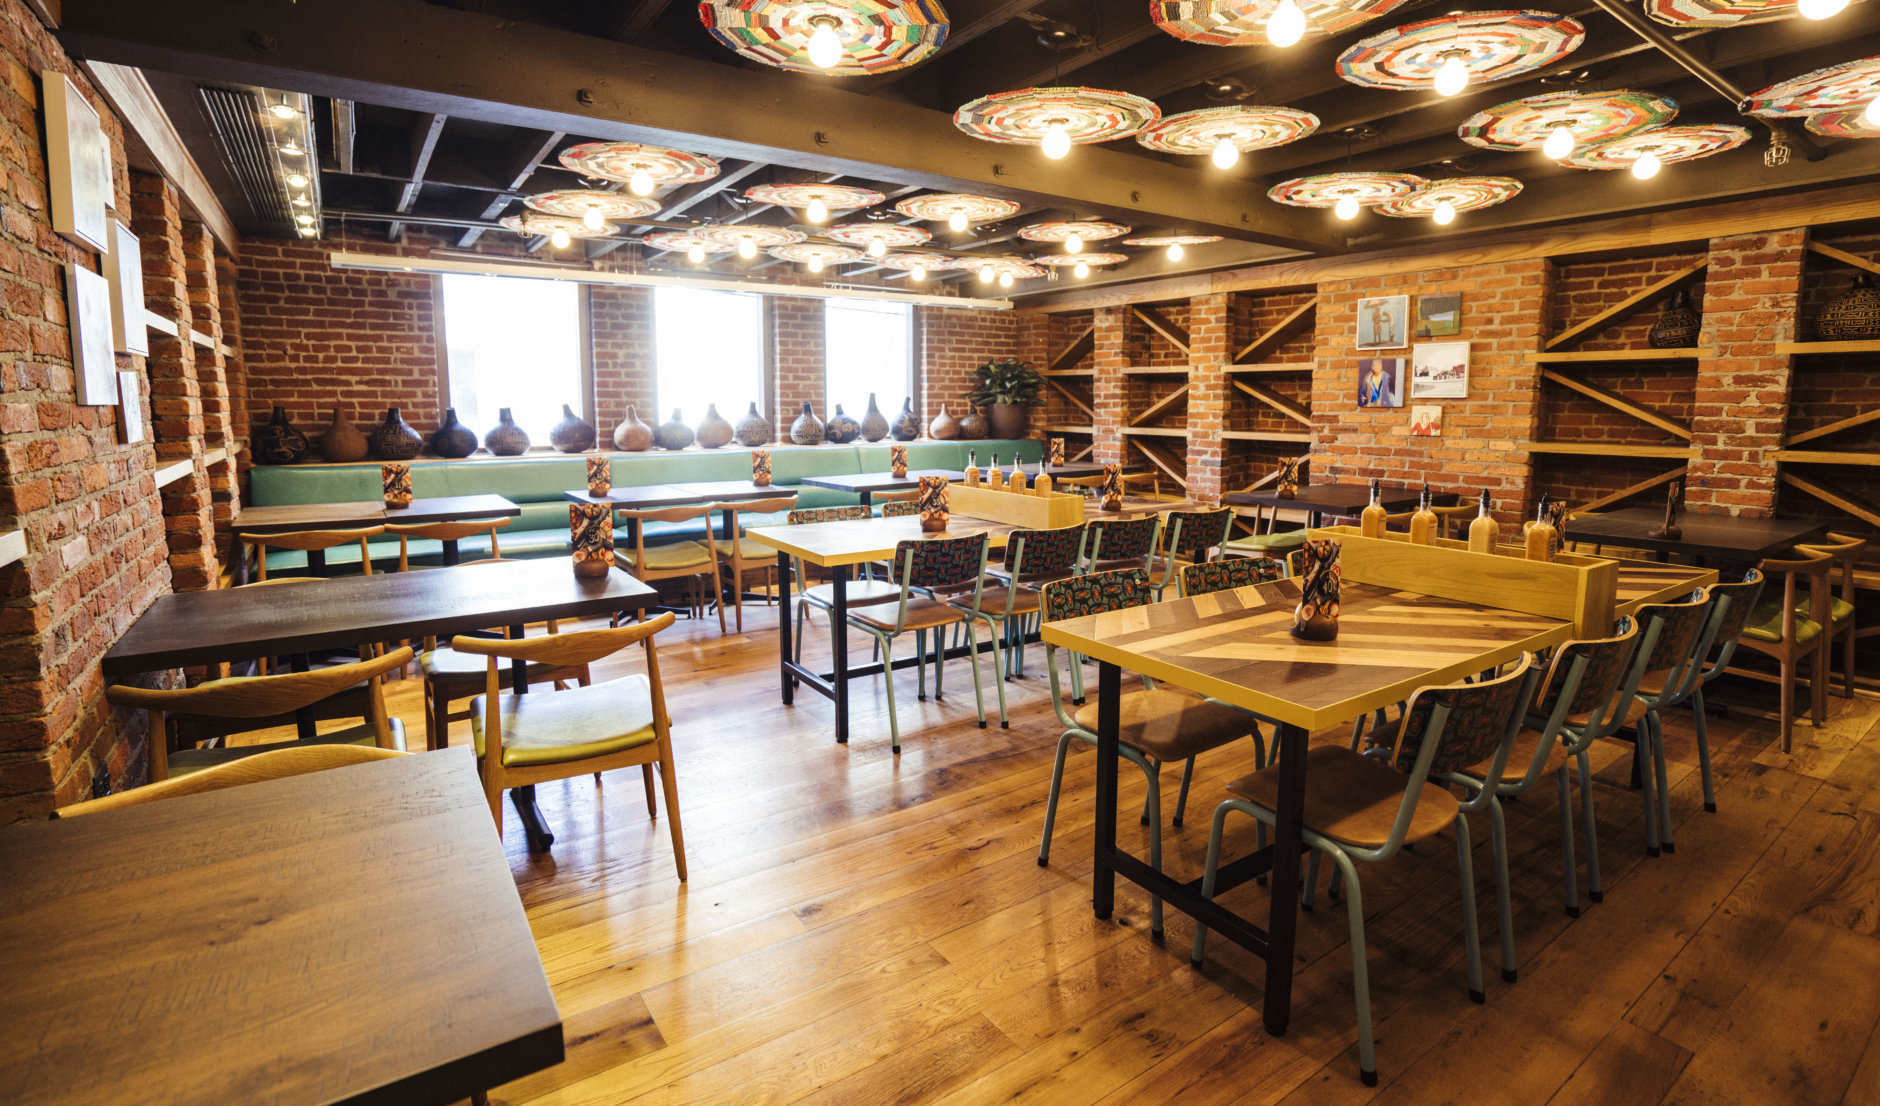 Nando’s says after 10 years of operation, its restaurant in the historic 18th Street building was ready for a revamp.  (Courtesy Courtesy Nando’s Peri-Peri)